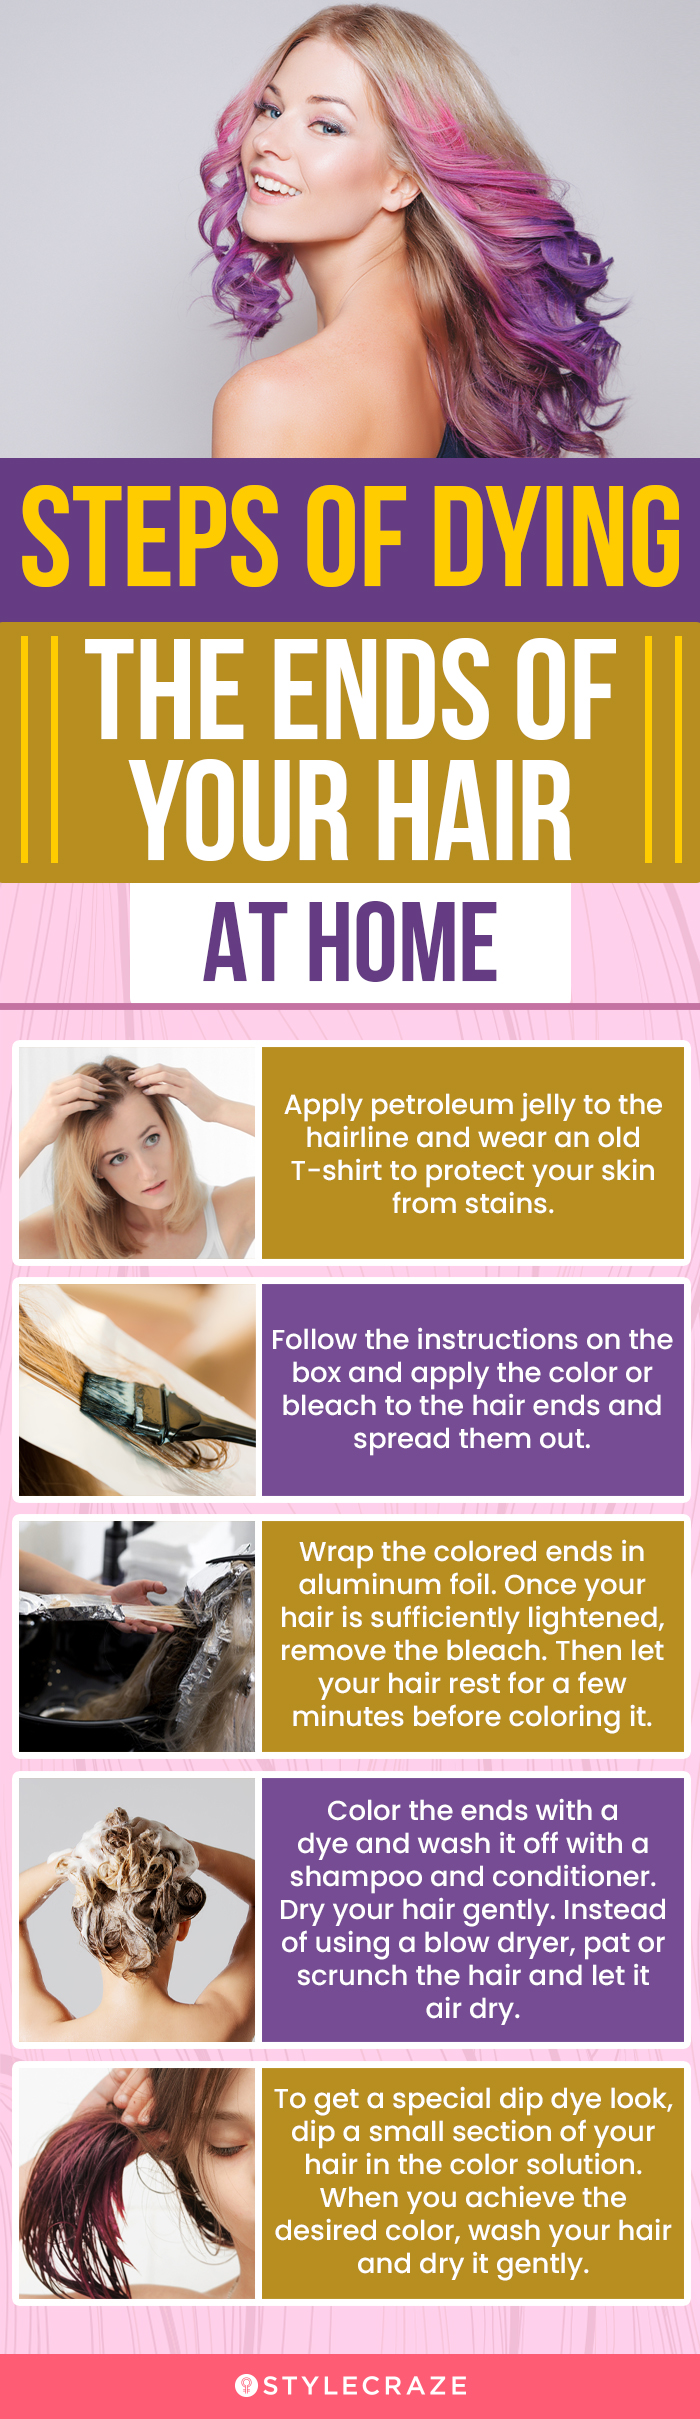 steps of dying the ends of your hair at home (infographic)